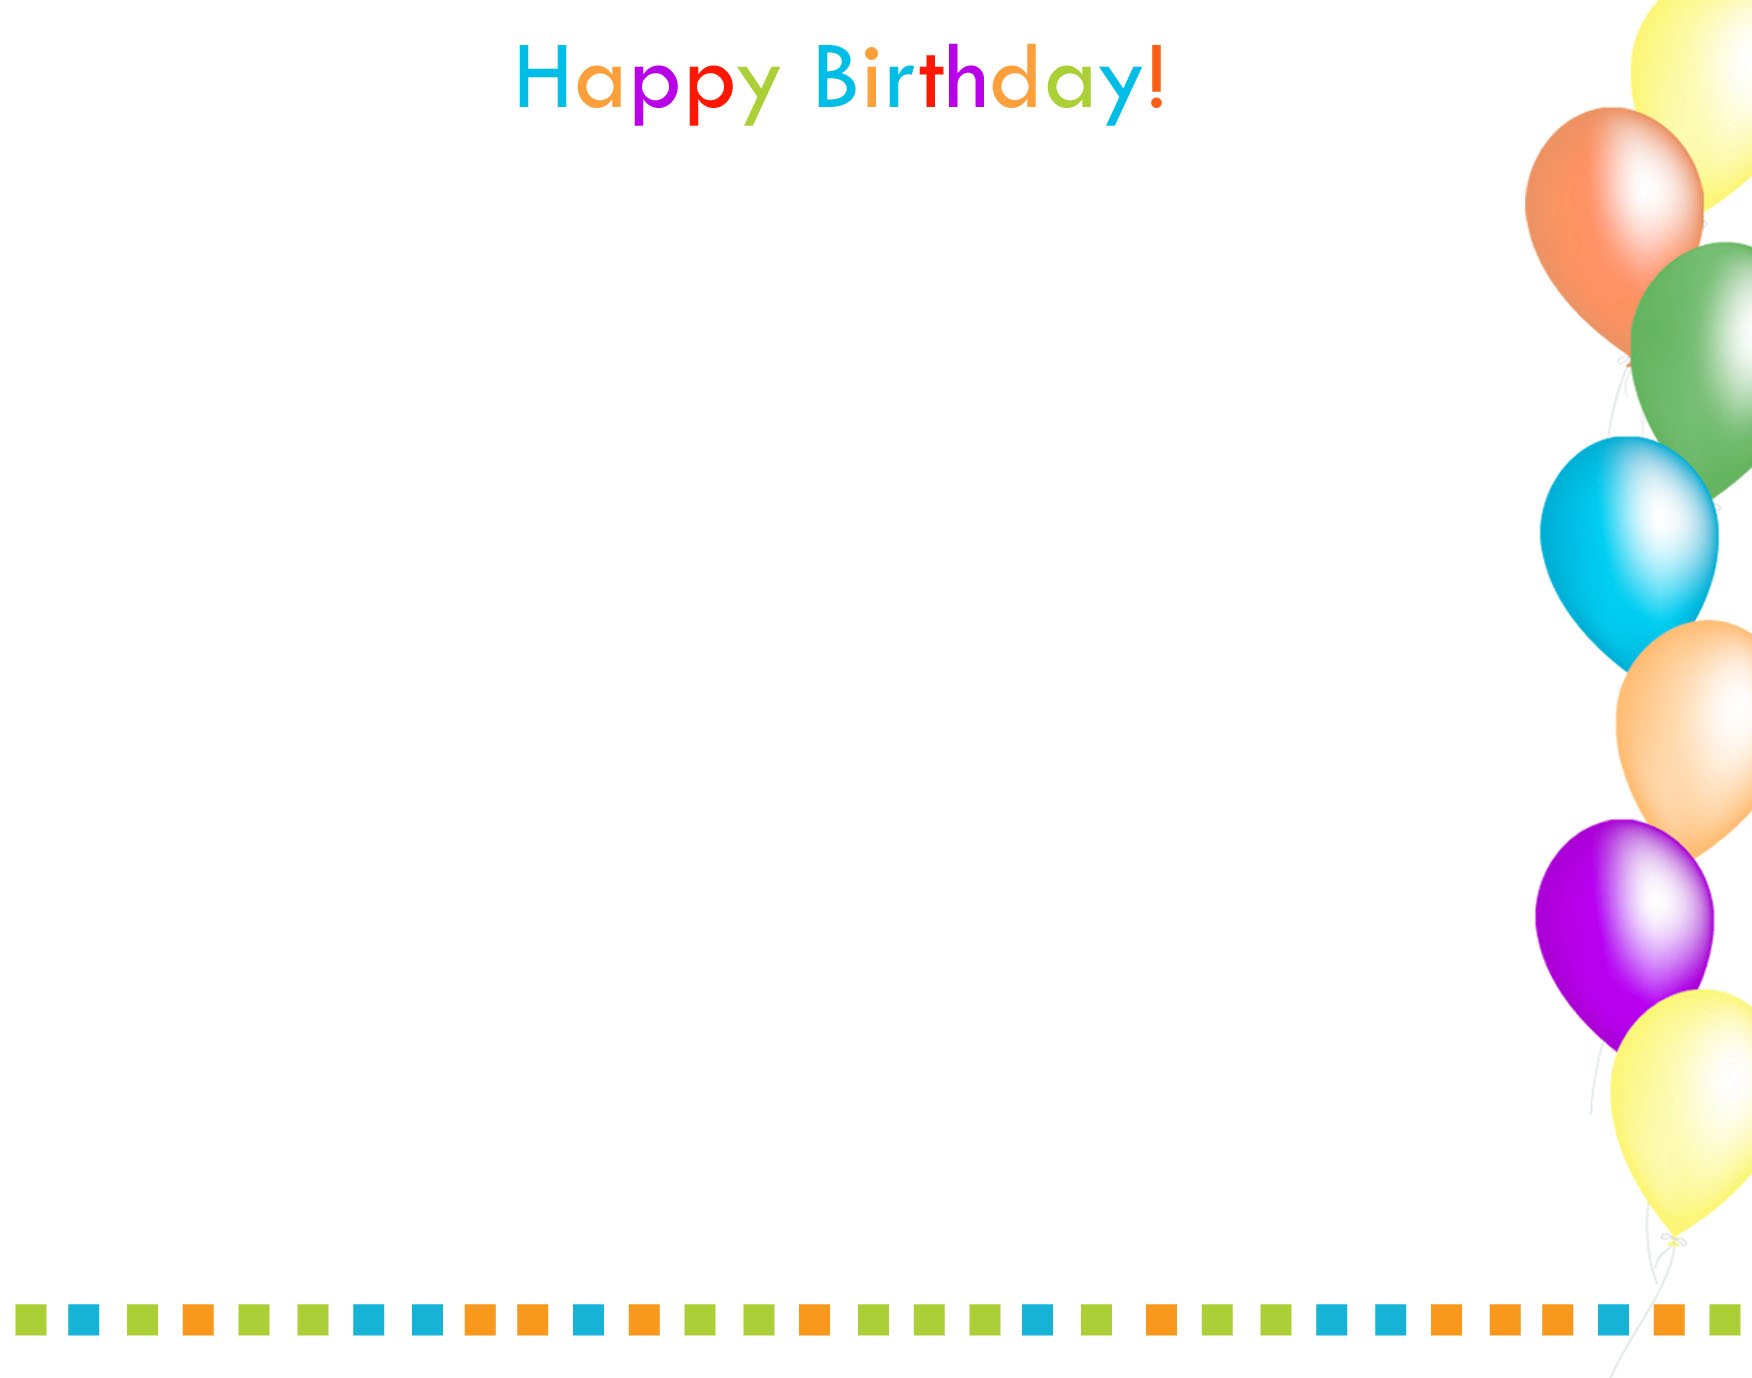 Free Celebration Borders or Backgrounds Download HD Wallpapers